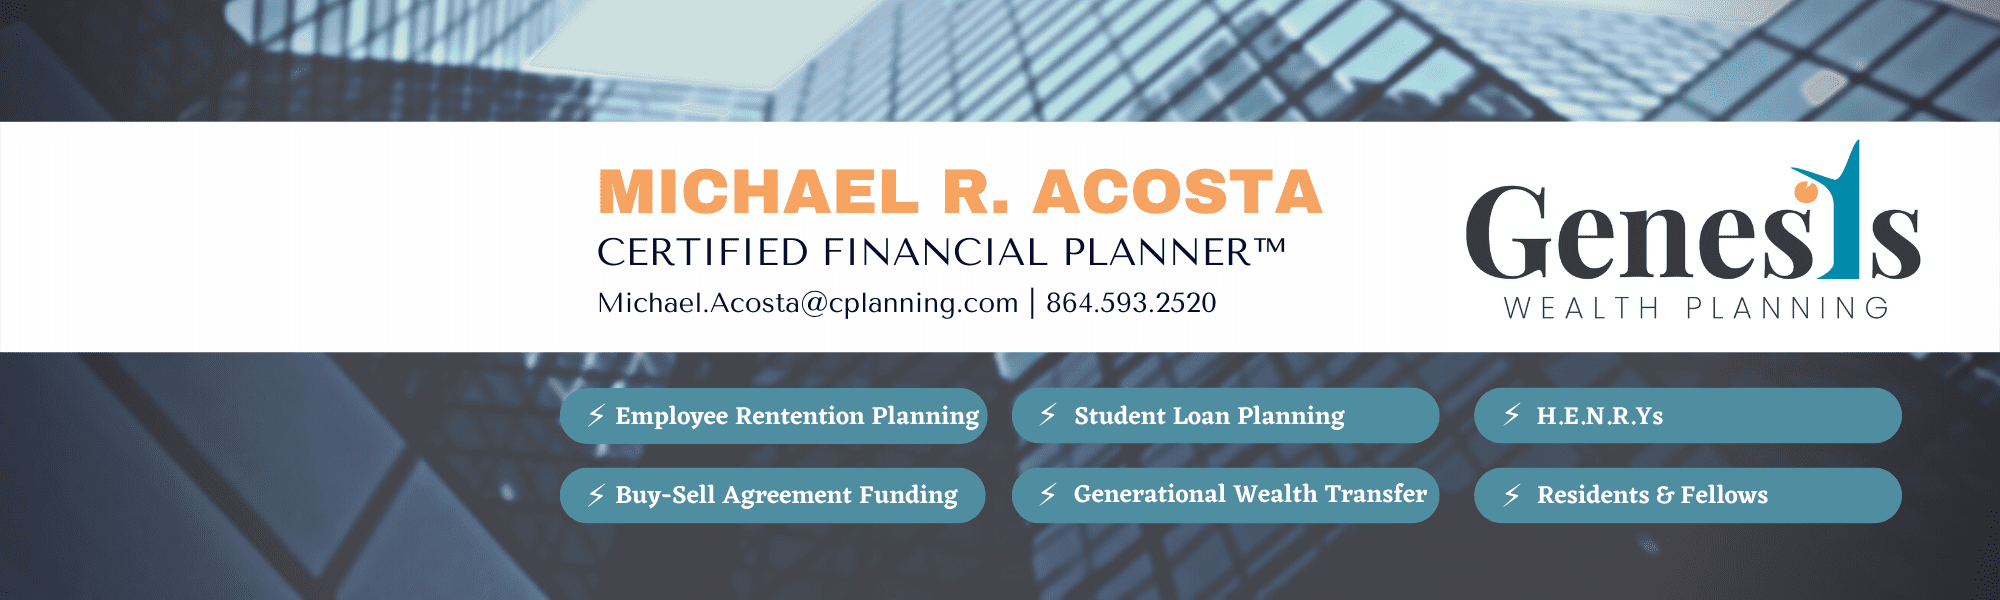 An advertisement banner for a financial planning service featuring certified financial planner michael r. acosta with services in employee retention planning, student loan planning, buy-sell agreement funding, generational wealth transfer, and specialized planning for residents and fellows, set against a backdrop of financial building imagery.